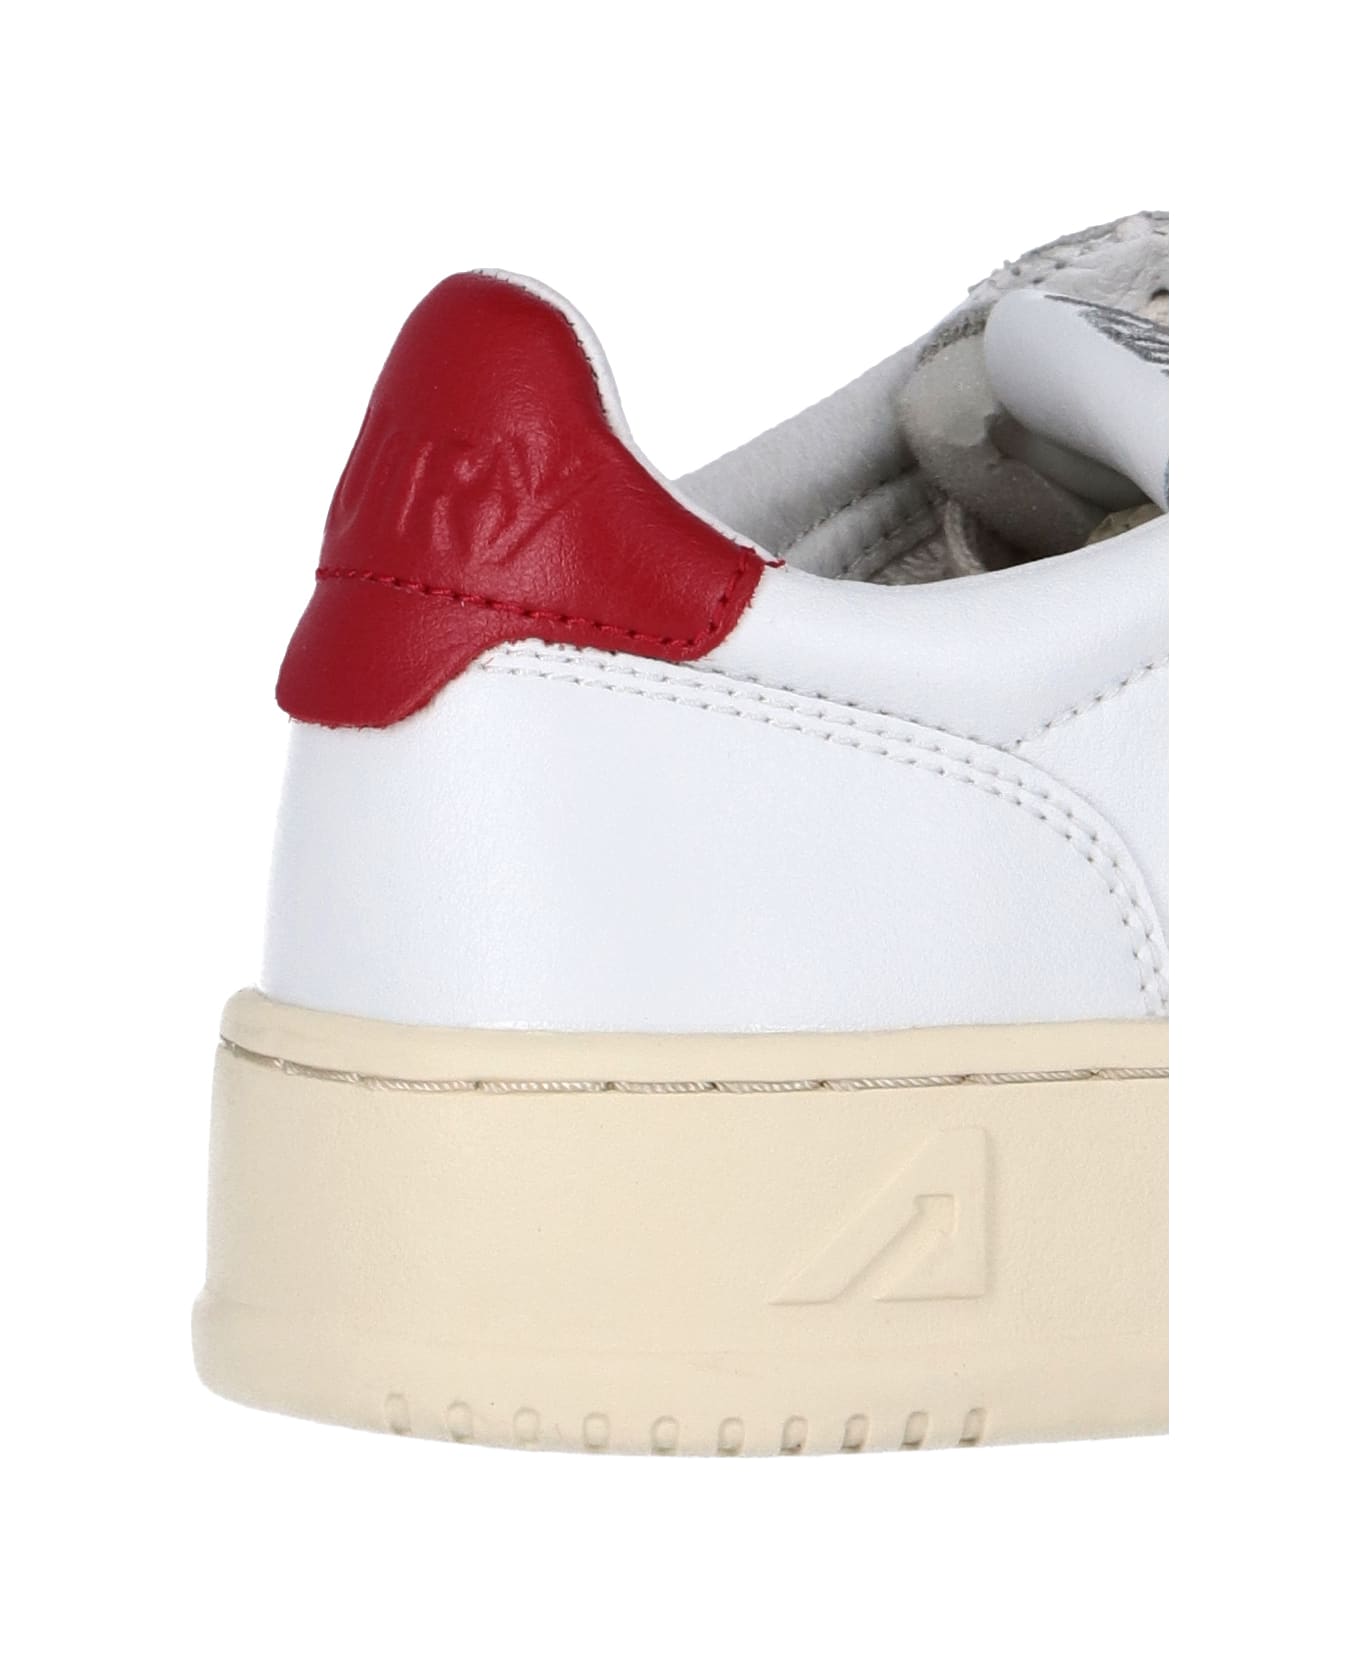 Autry 'medalist' Low Sneakers - Bianco/Rosso スニーカー